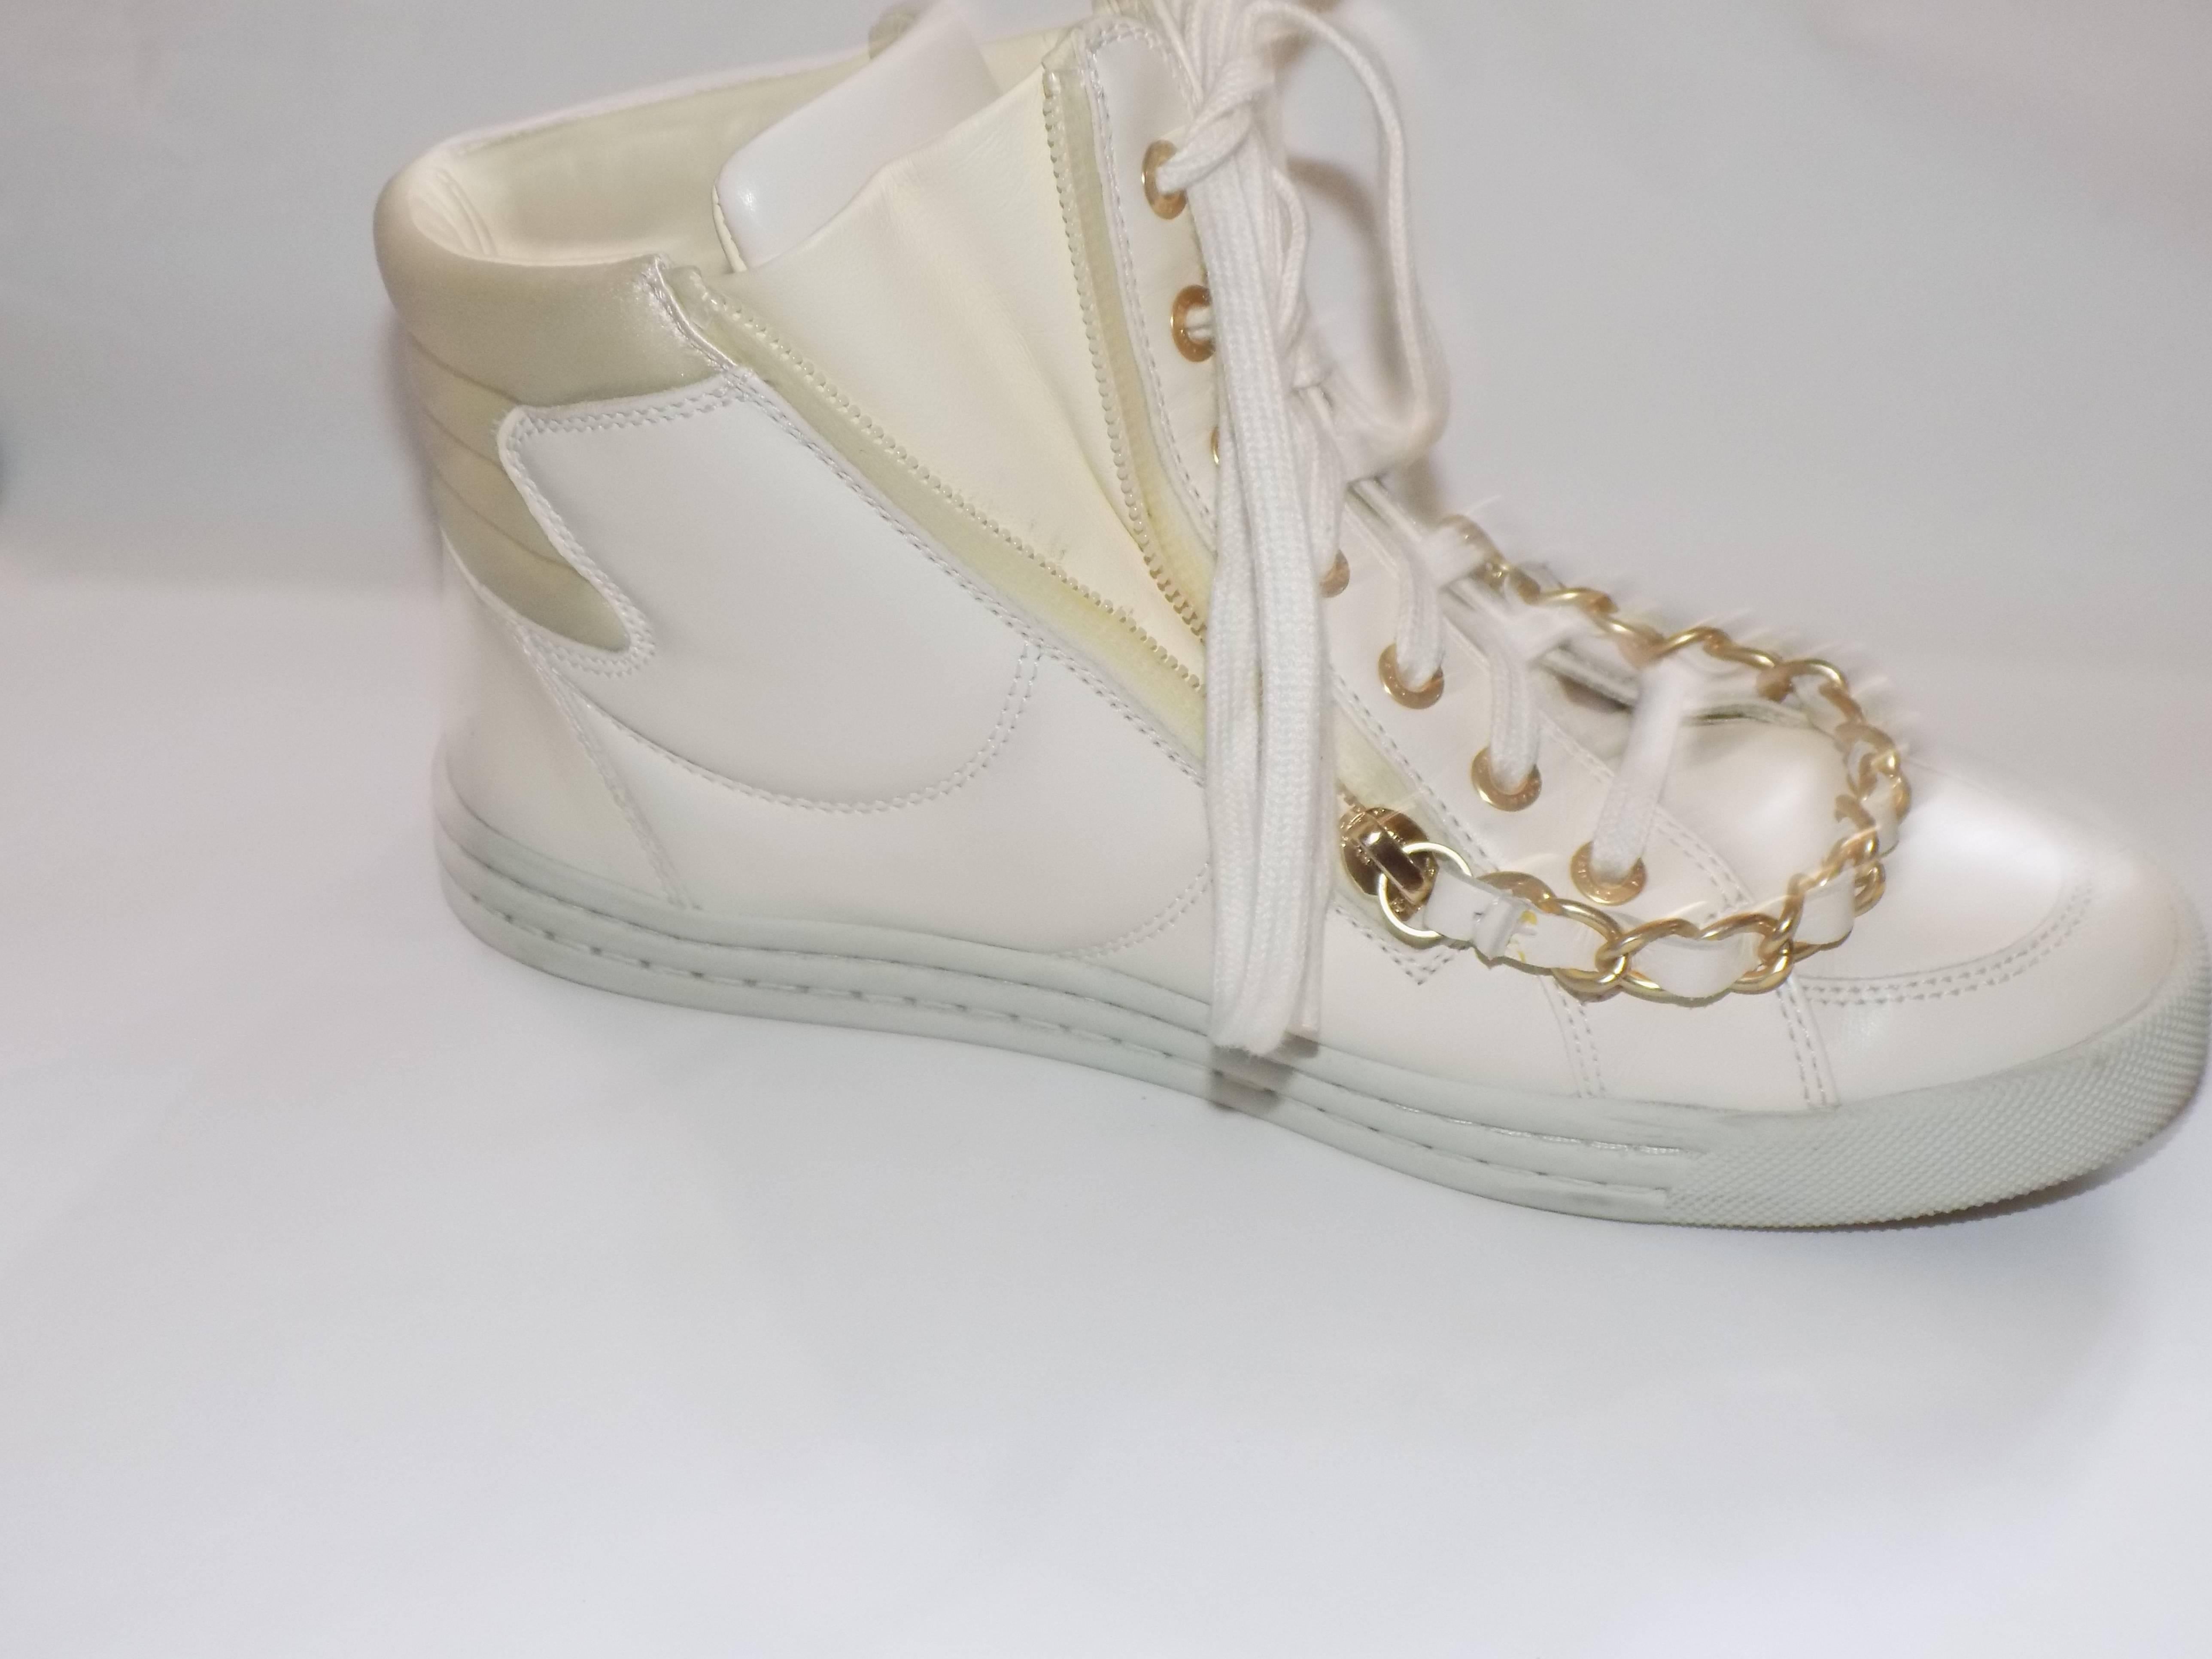 Gray  Chanel 37.5   High Top Sneakers shoes  with  Chain winter white